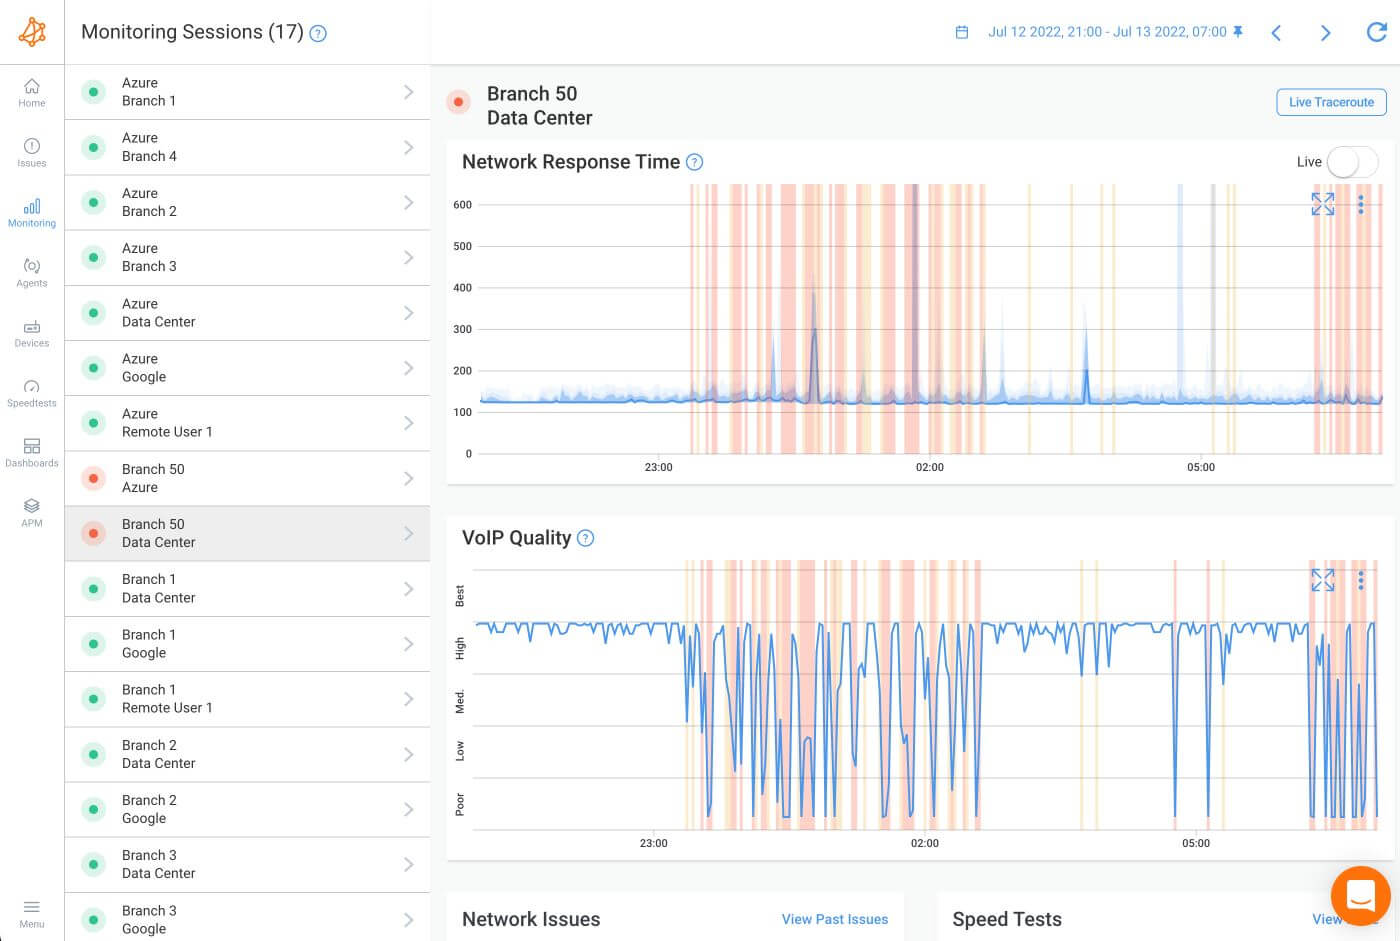 Obkio Network Performance Monitoring Tool Network Session Page